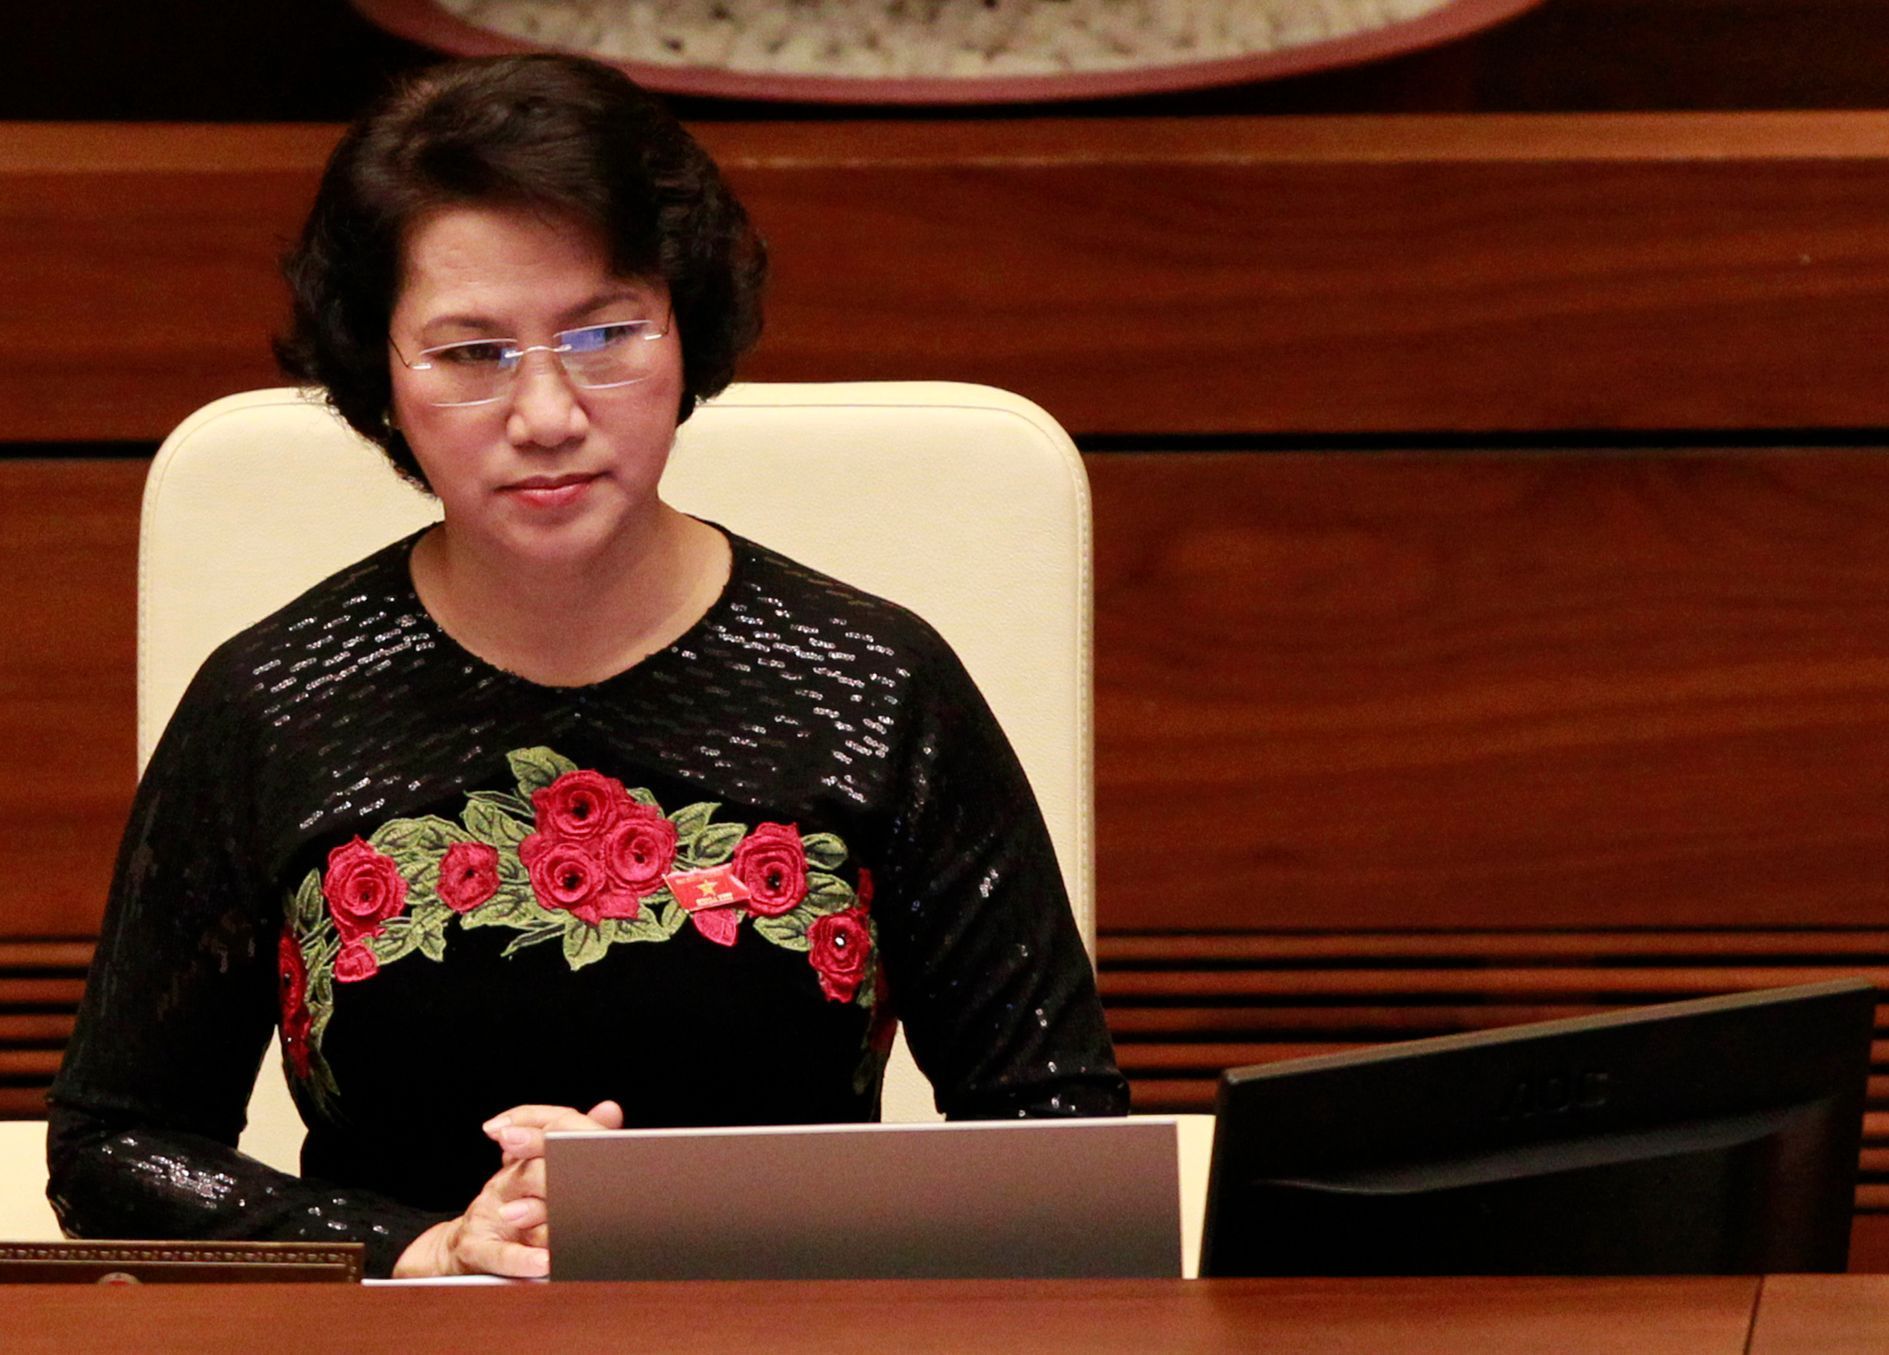 Vietnam's National Assembly's Vice Chairwoman Nguyen Thi Kim Ngan attends the opening ceremony of the Spring Session of the National Assembly of Vietnam in Hanoi